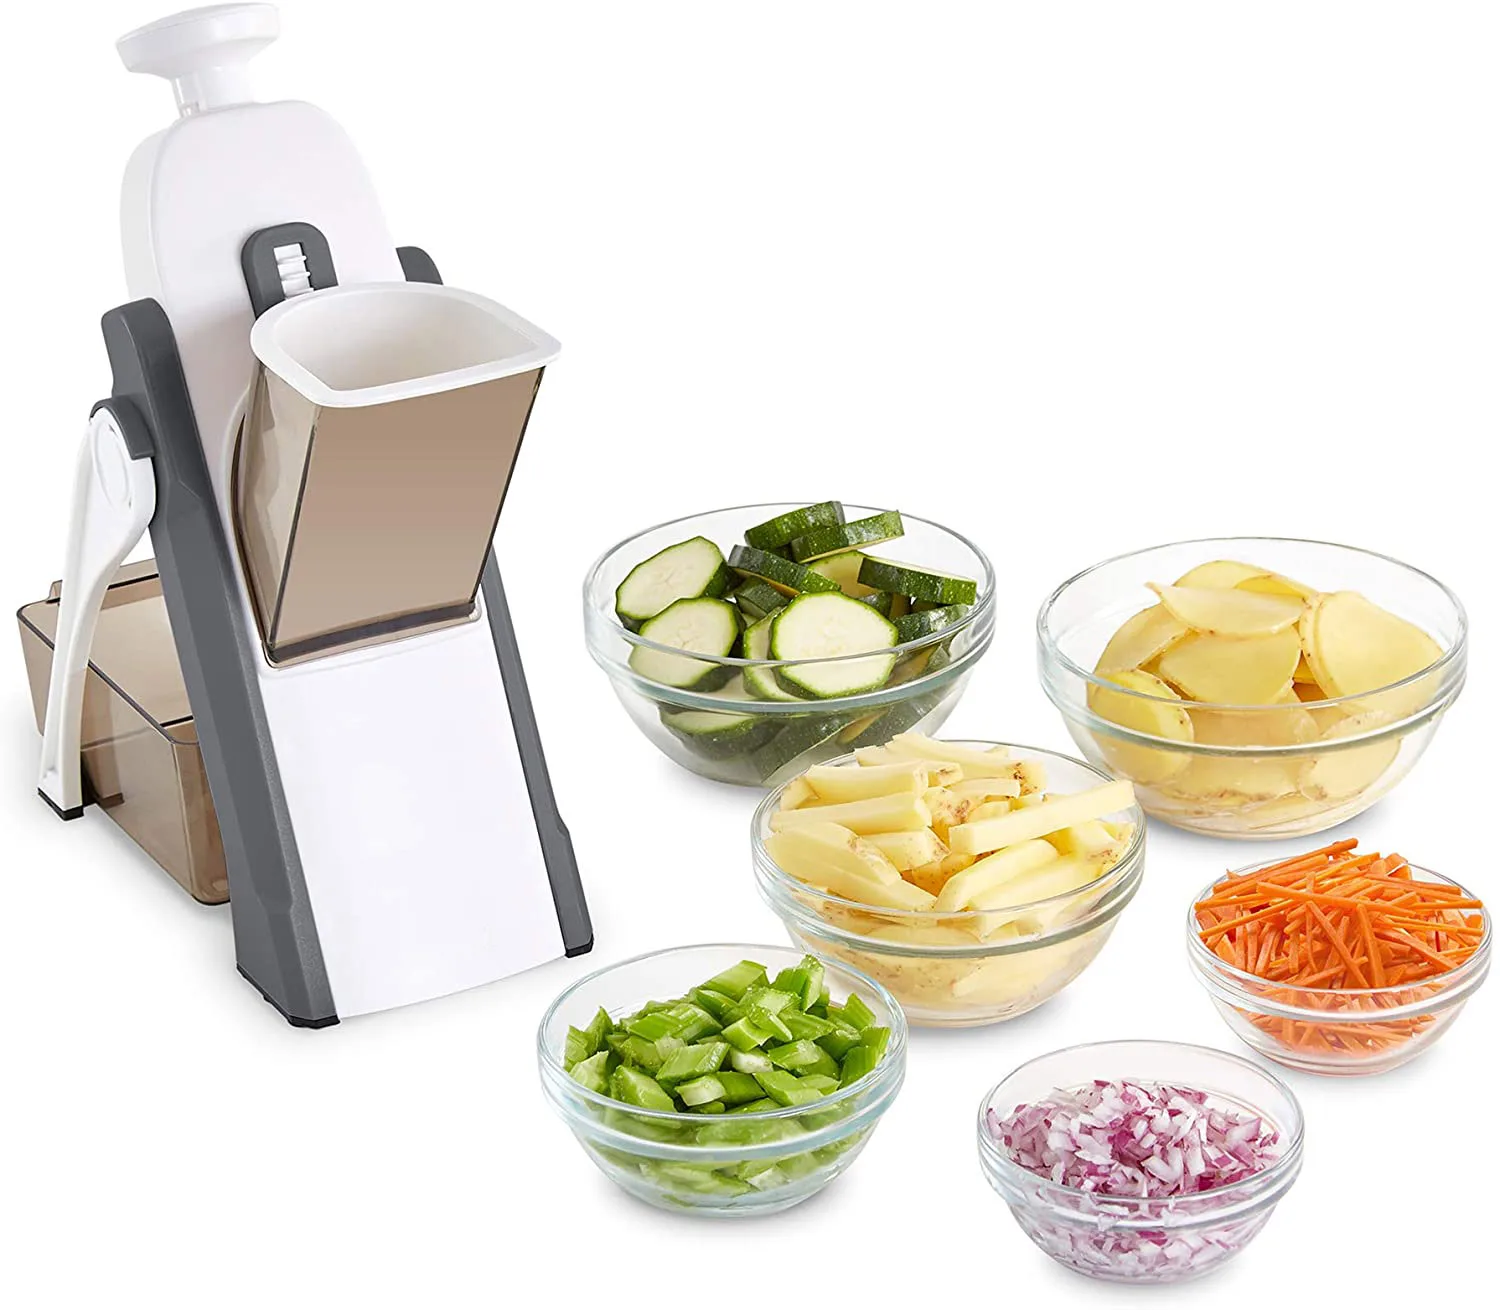 

Kitchen accessories tools gadgets amazon top seller fruit and Vegetable Chopper handle Slicer tool manual spiralizer cutter